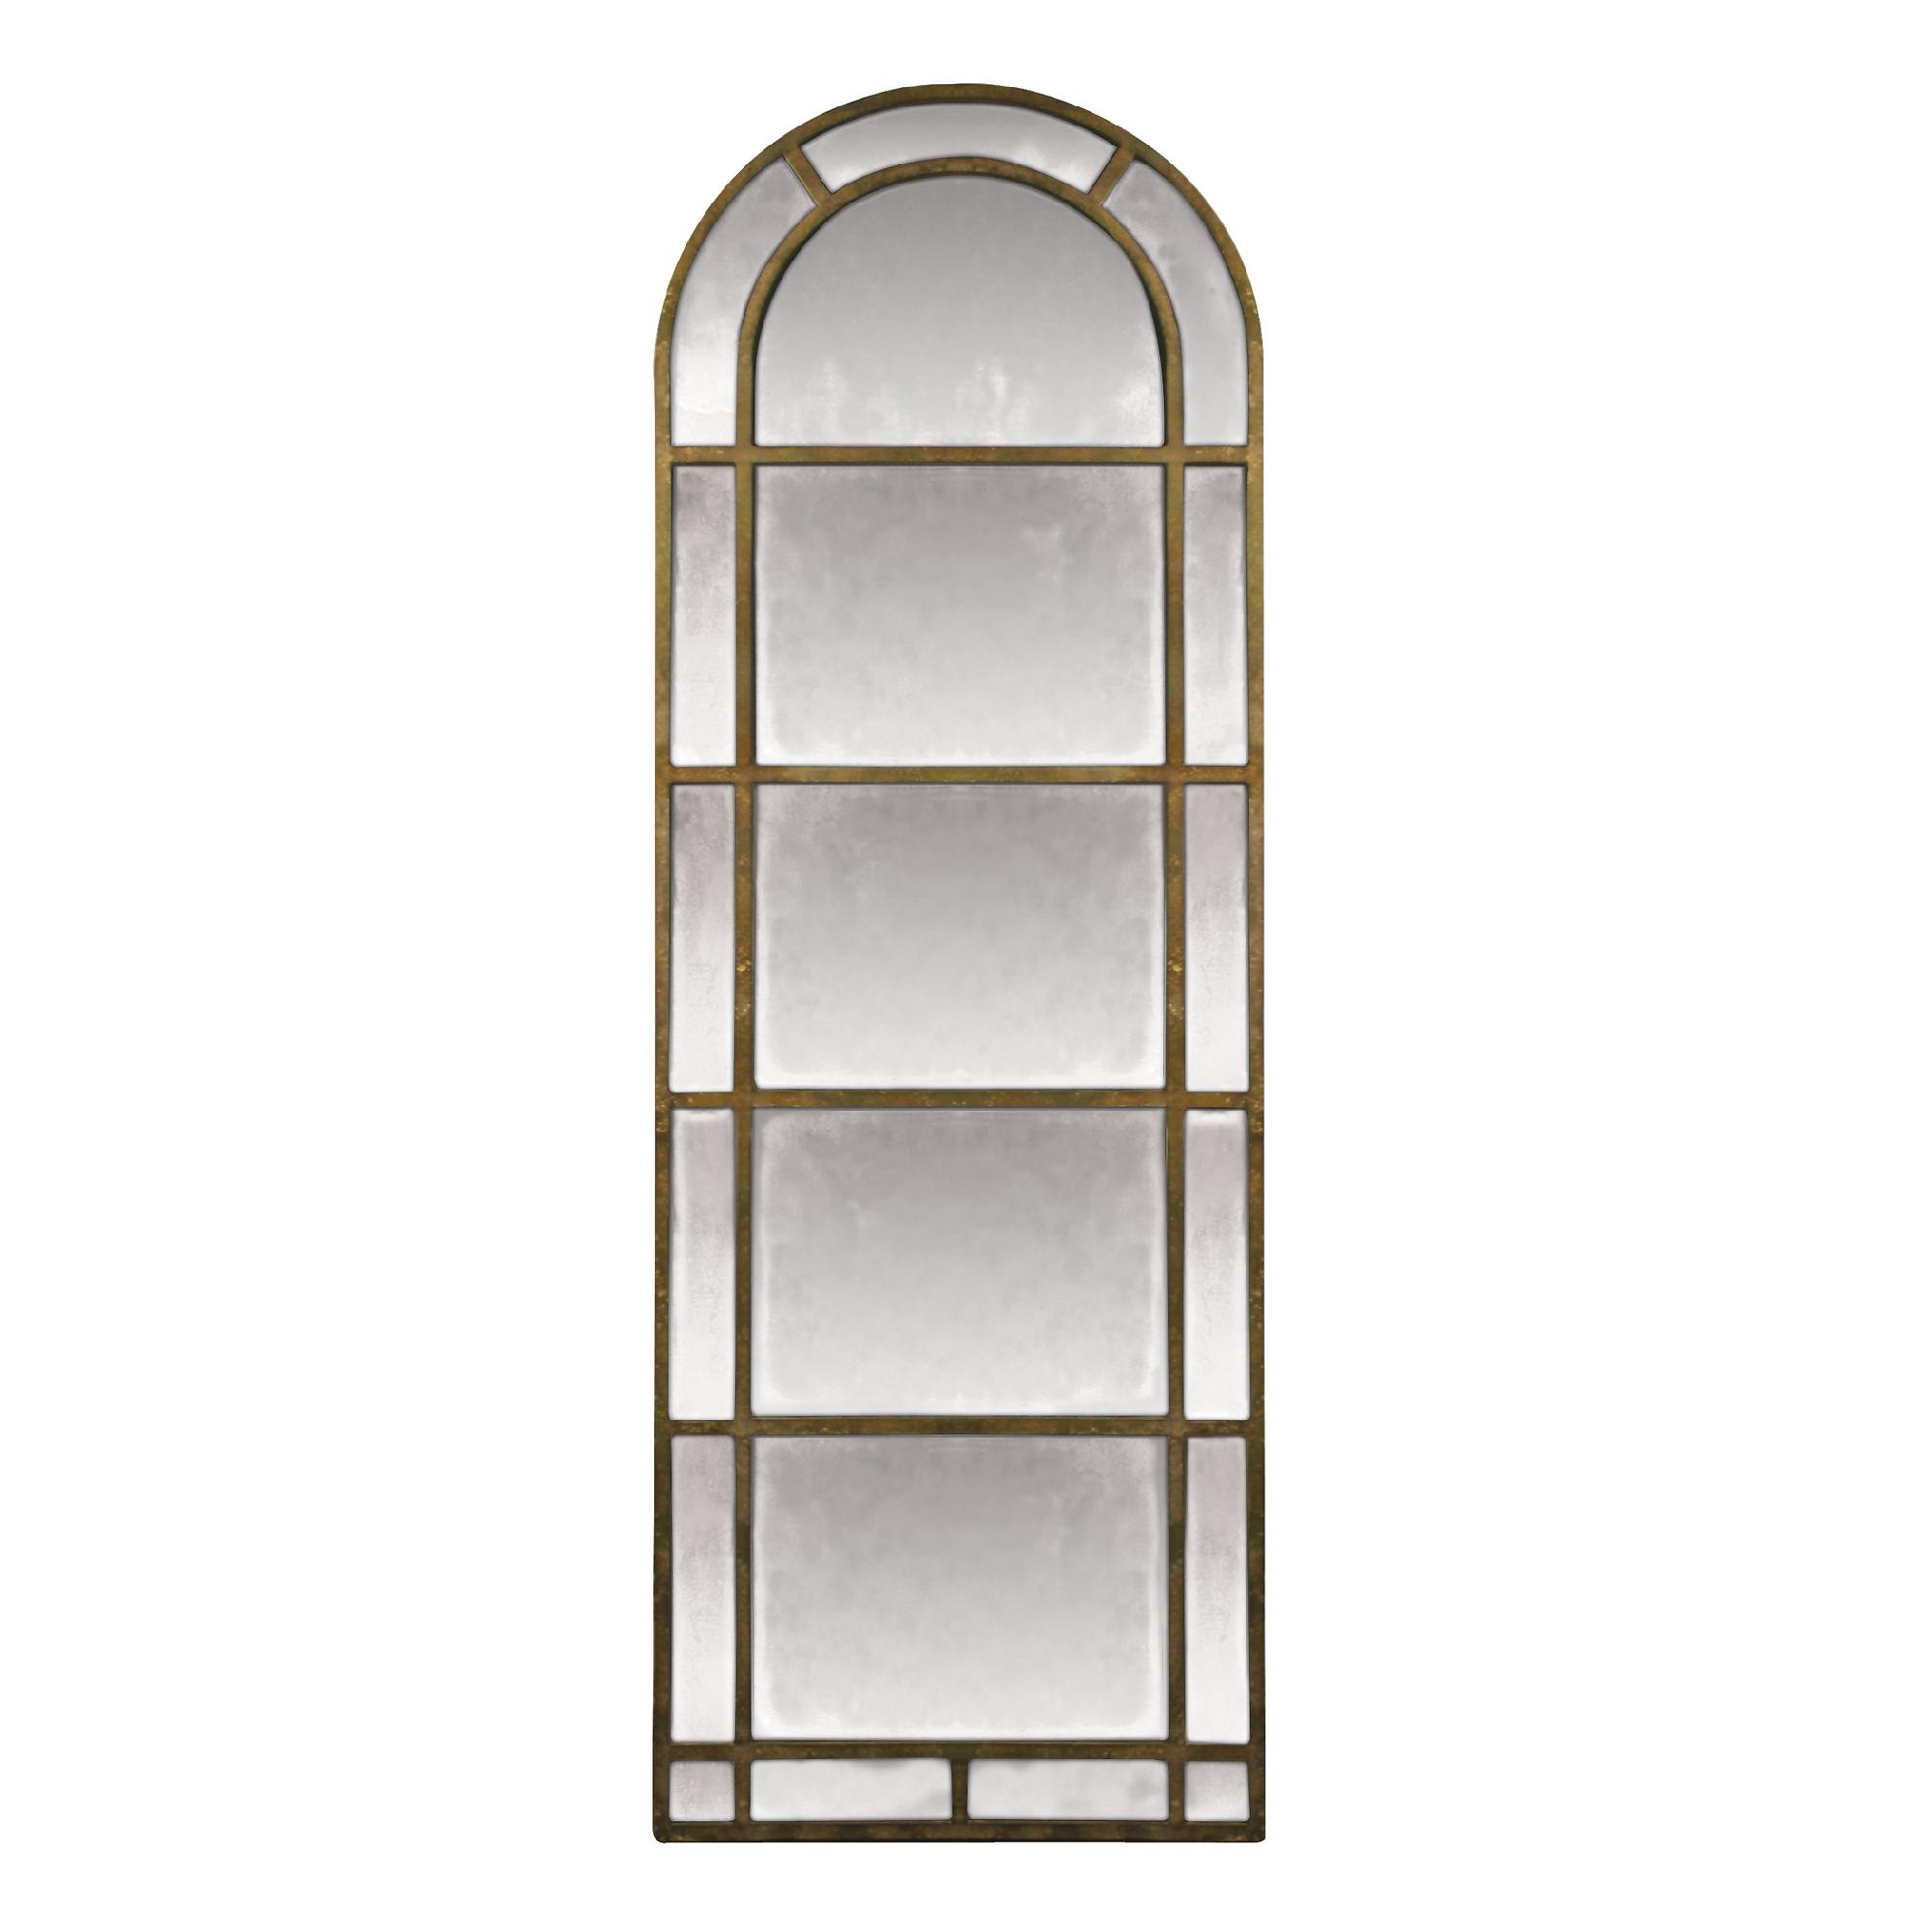 Sterling Industries Arched Pier In Antique Gold Mirror